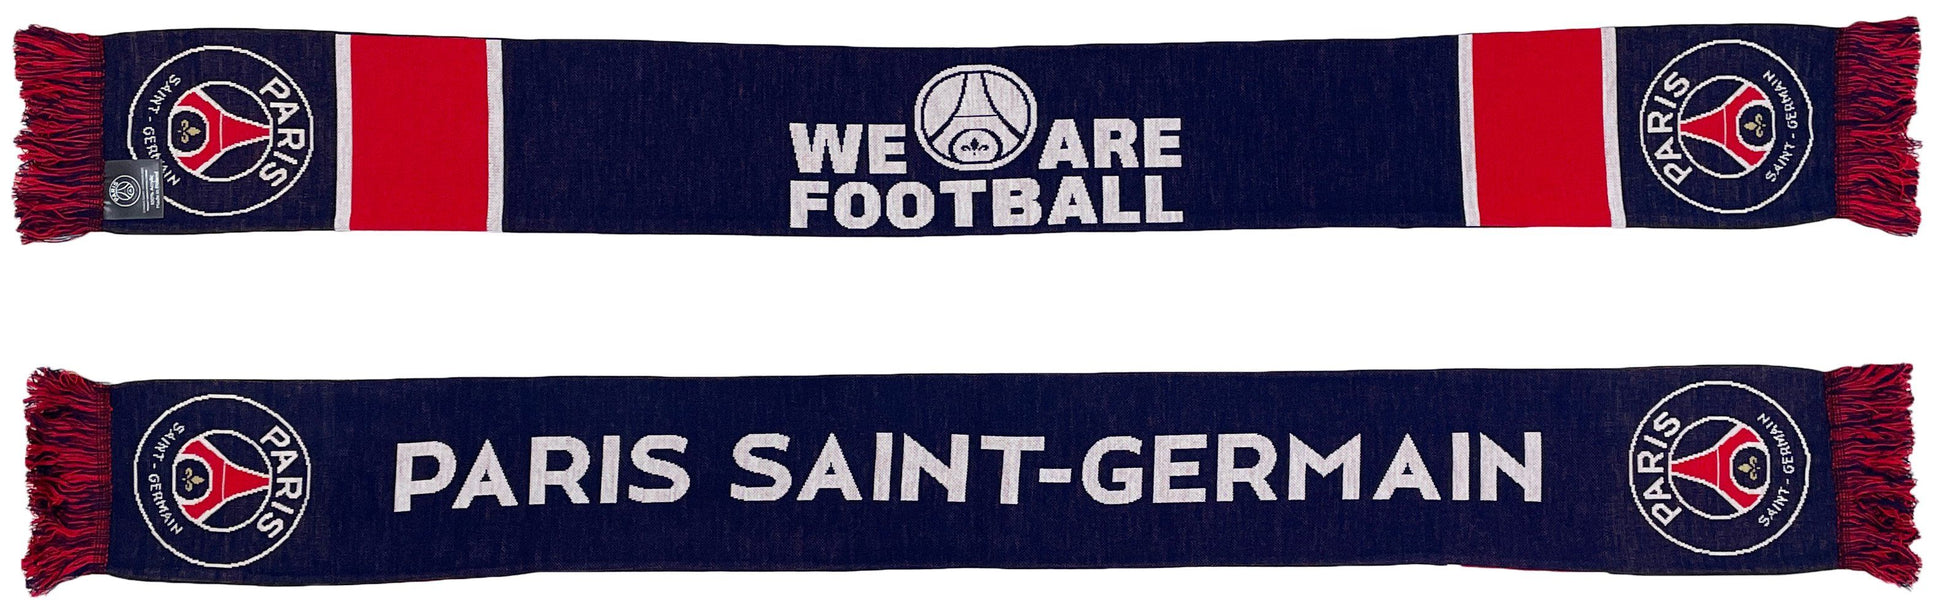 PSG Scarf - We Are Football (HD Knit)